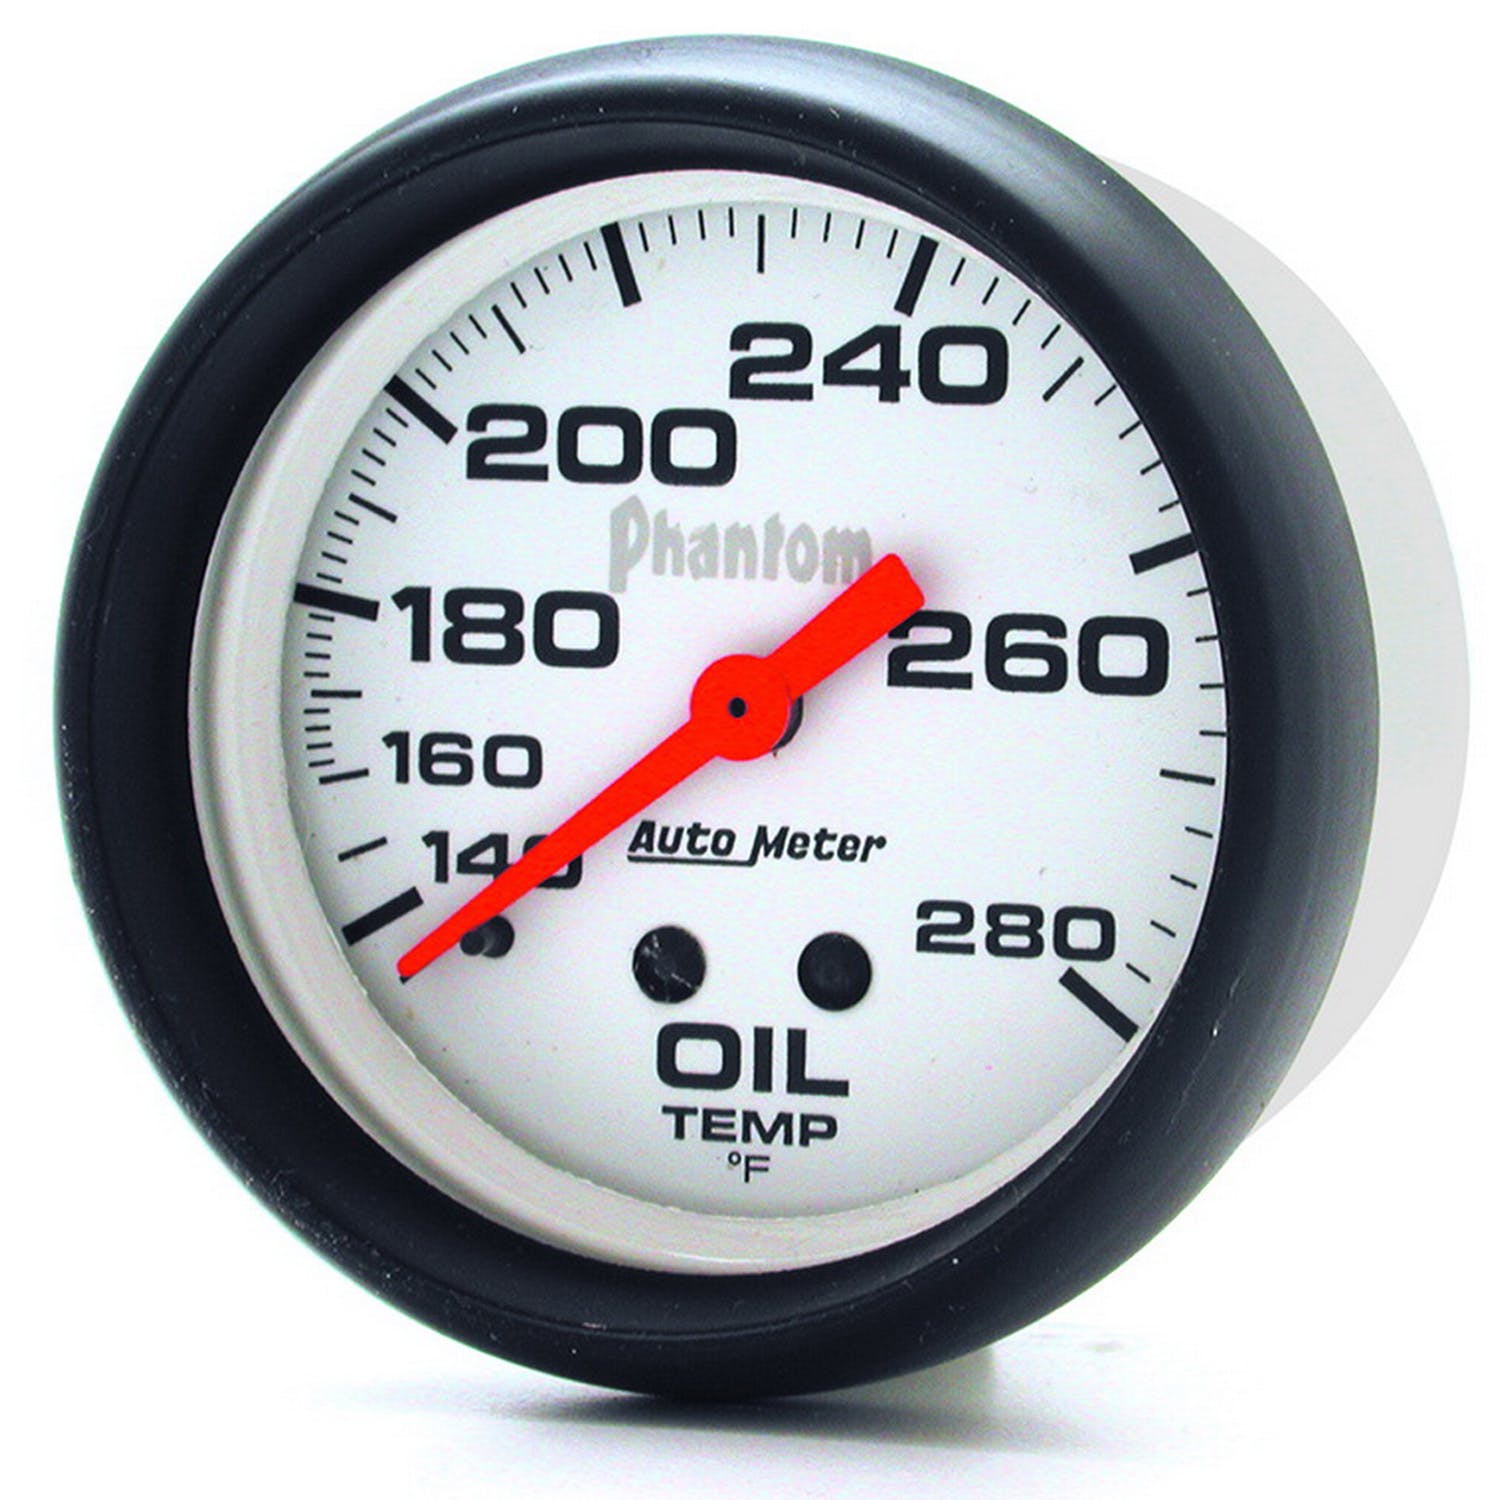 AutoMeter Products 5841 Oil Temp 140-280 F